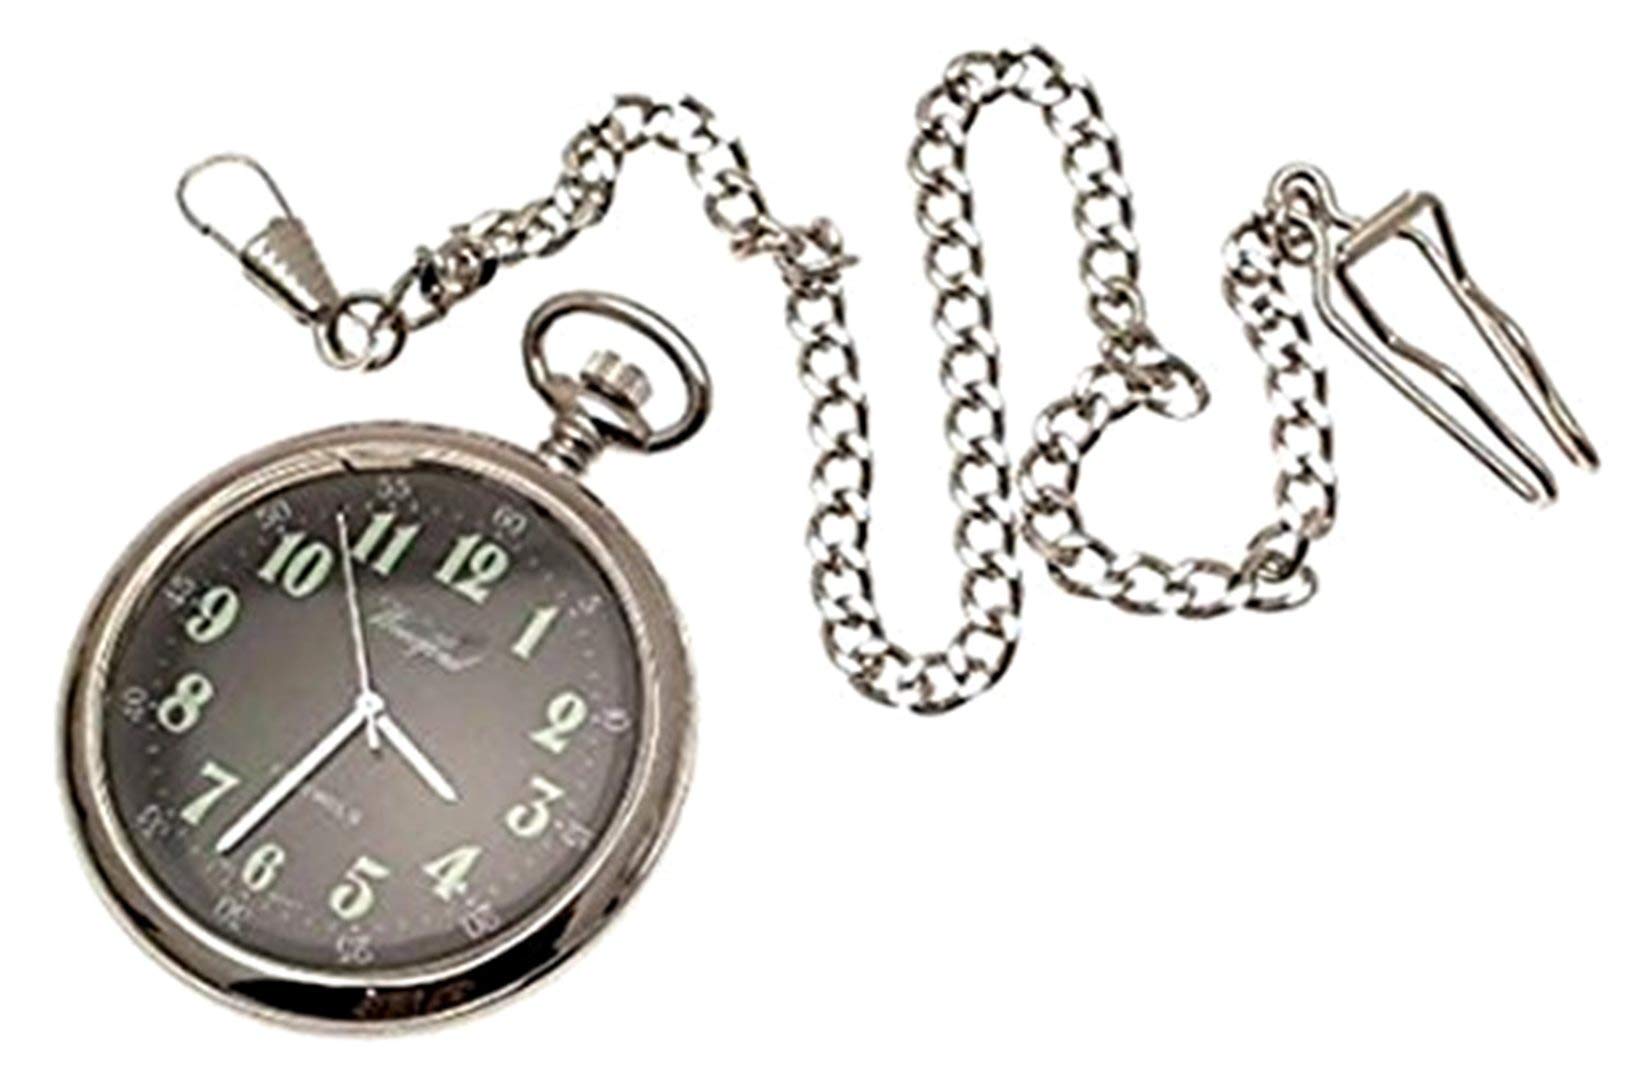 Reproduction WWI Style Mechanical Pocket Watch with Black face and Luminous Numbers